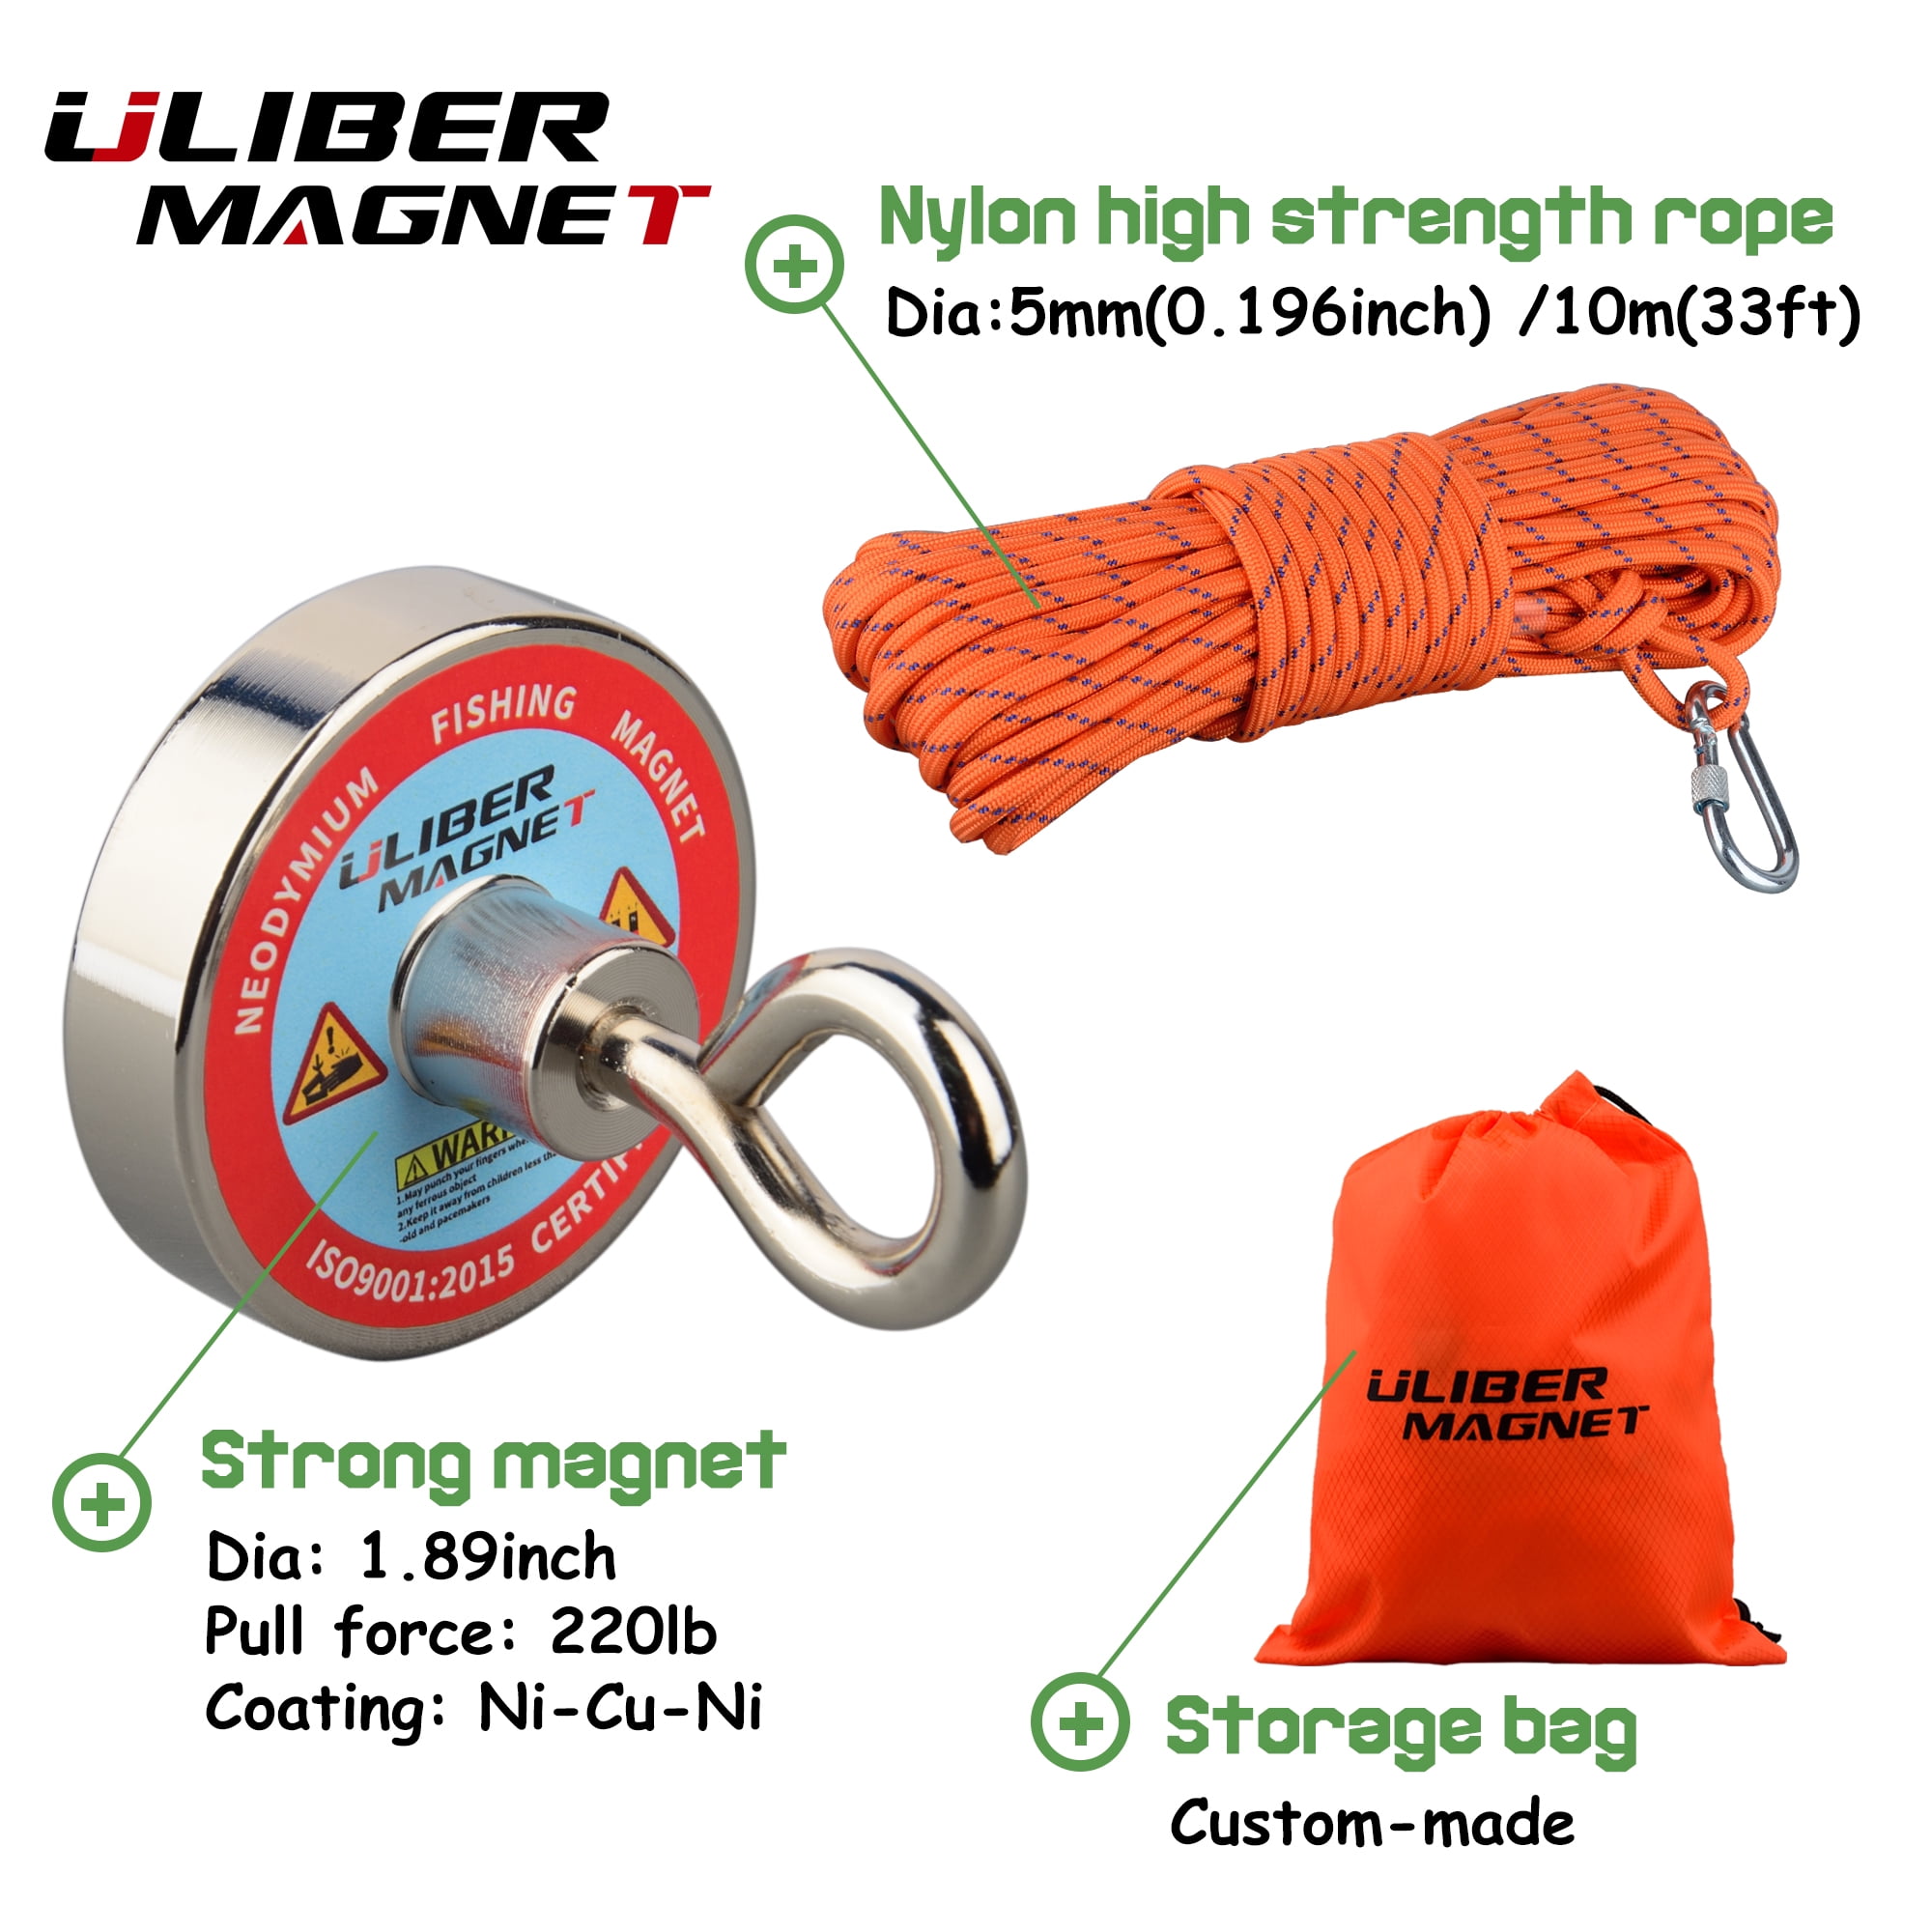 Hercules Magnetics 1000 lbs Magnet Fishing Kit, Fishing Magnet with 100ft  Nylon Rope with Carabiner Ultra-Powerful Magnets with Rope for Retrieving